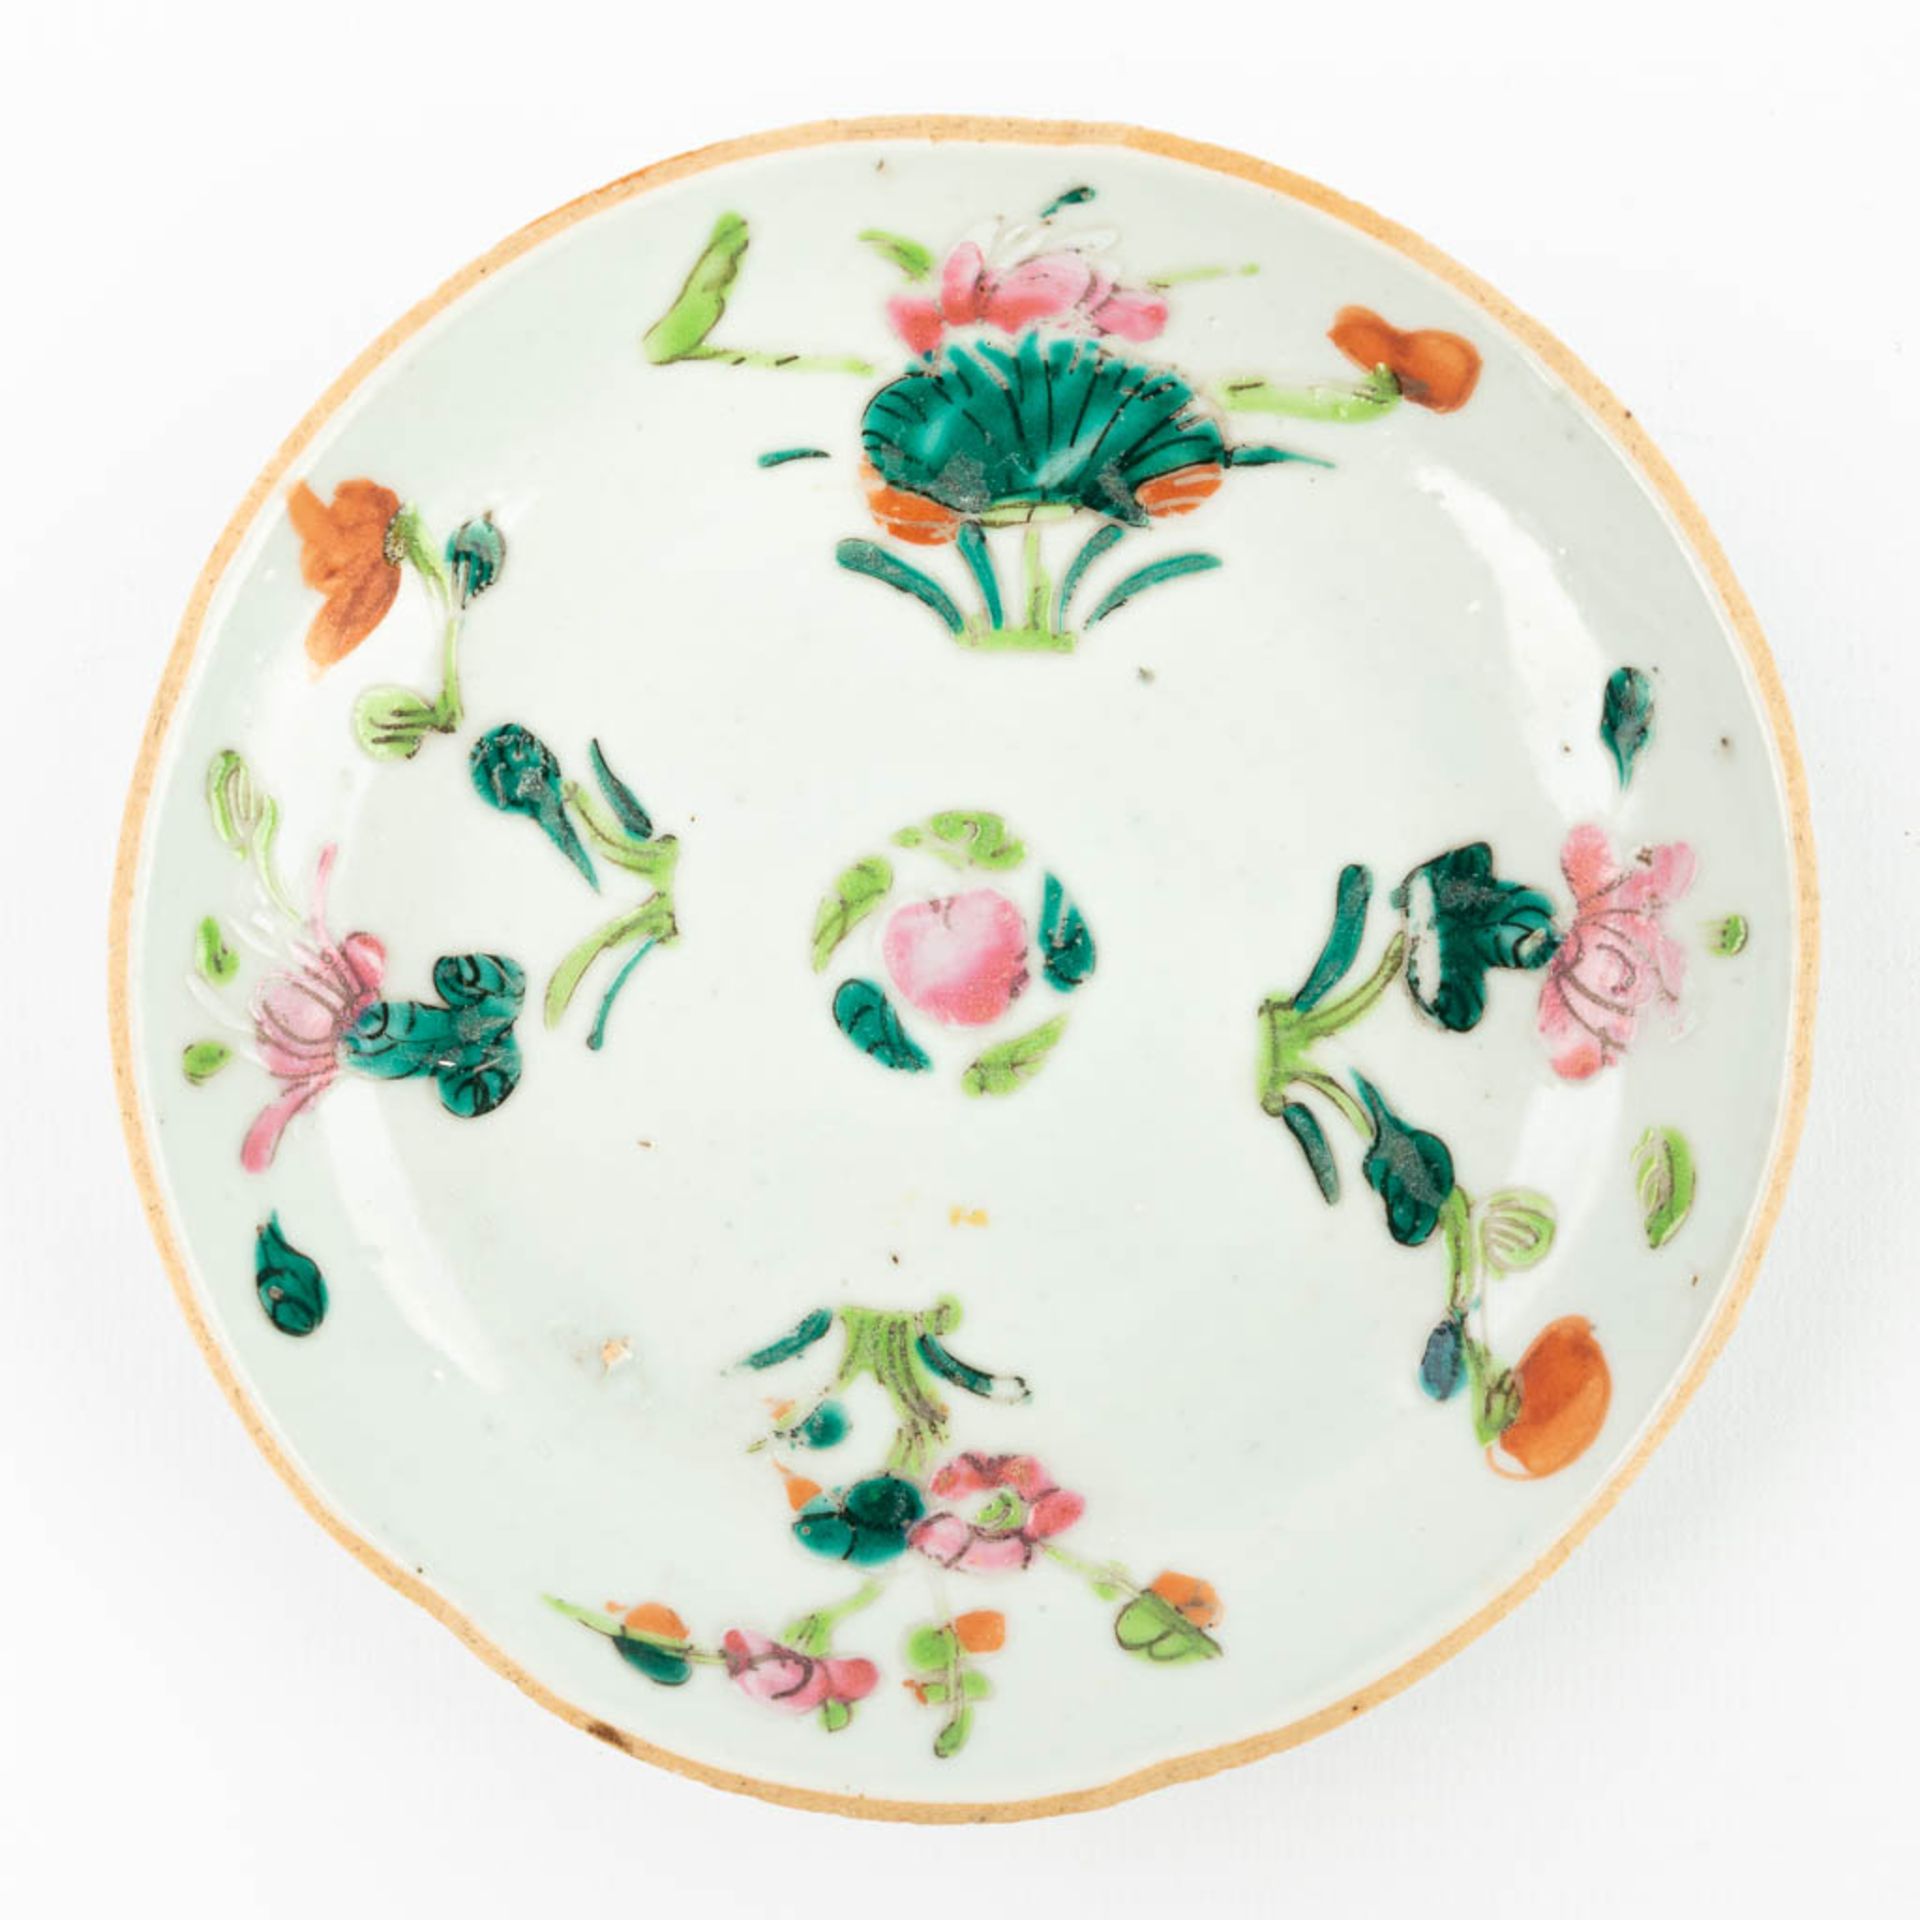 A set of 4 Chinese plates made of porcelain and decorated with peaches and flowers. (13,7 cm) - Image 11 of 14